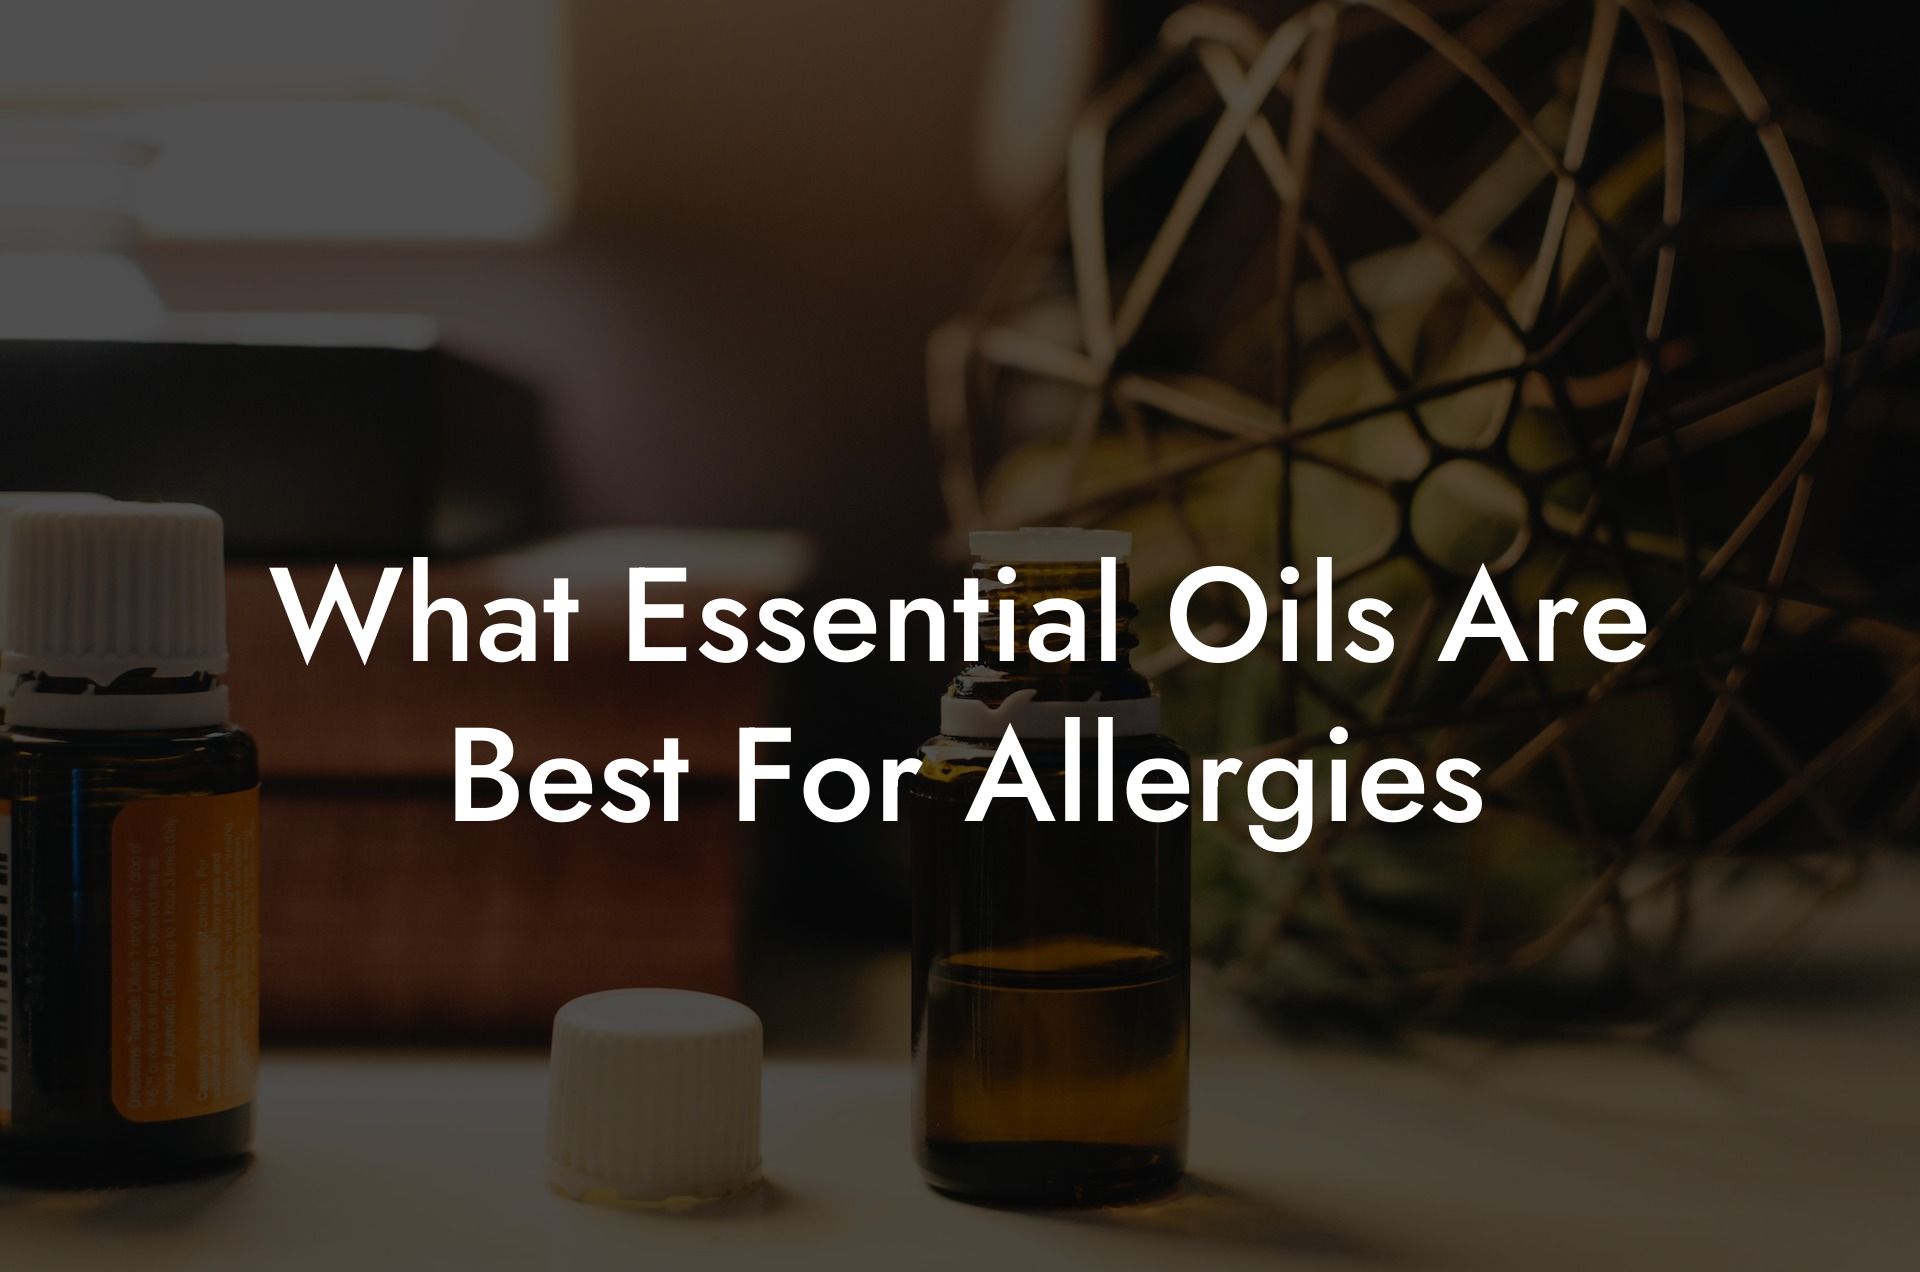 What Essential Oils Are Best For Allergies